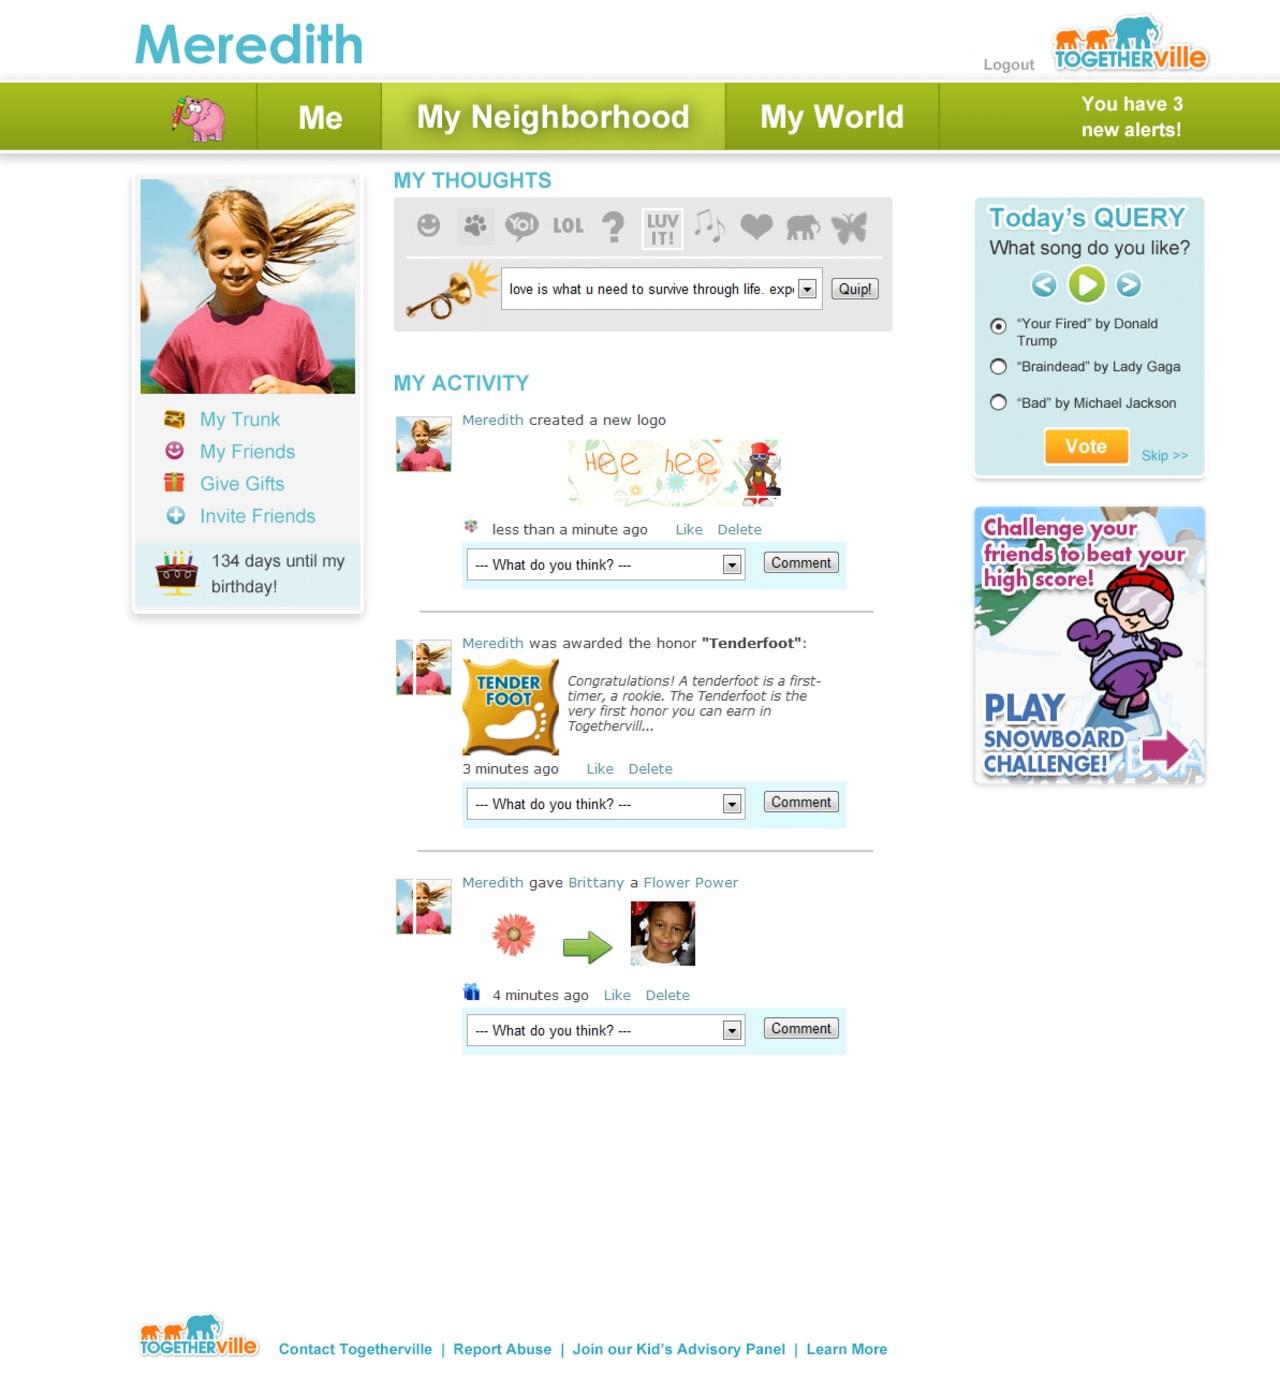 The Kids home page